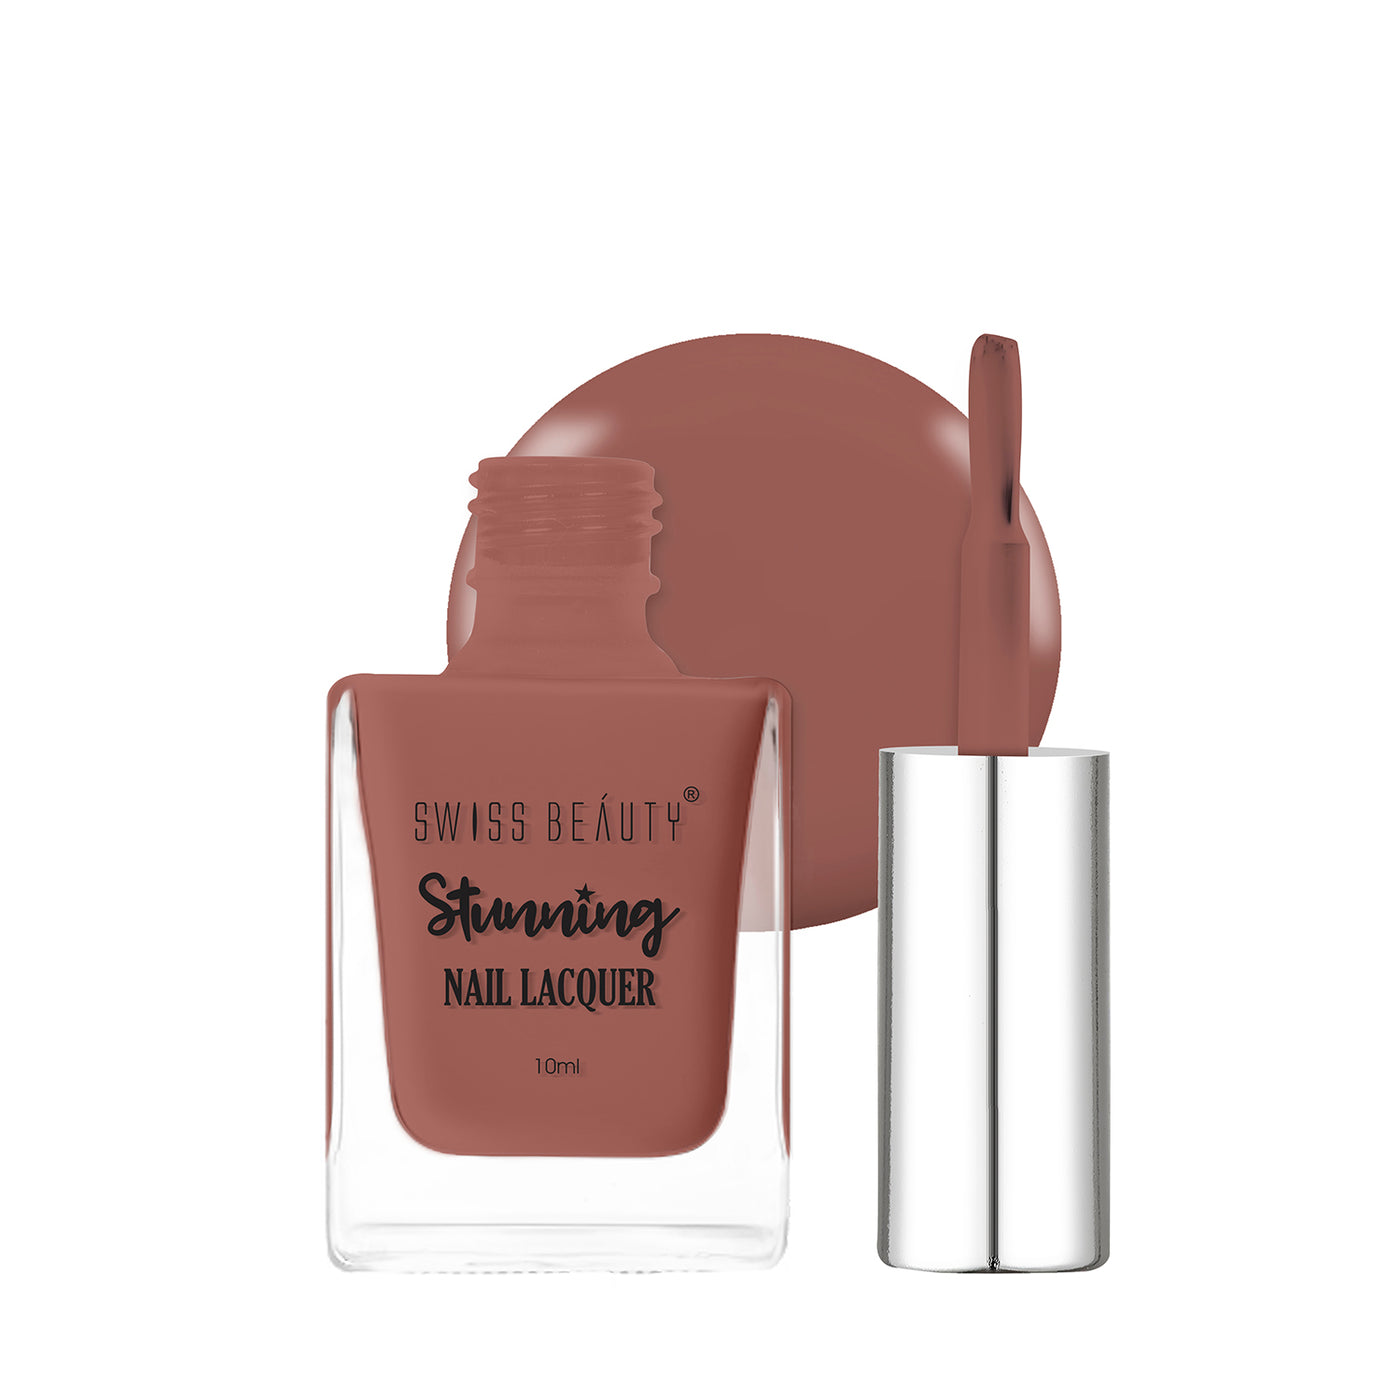 Buy Swiss Beauty Stunning Nail Lacquer - 105 (Hot Red_1) Online at Low  Prices in India - Amazon.in